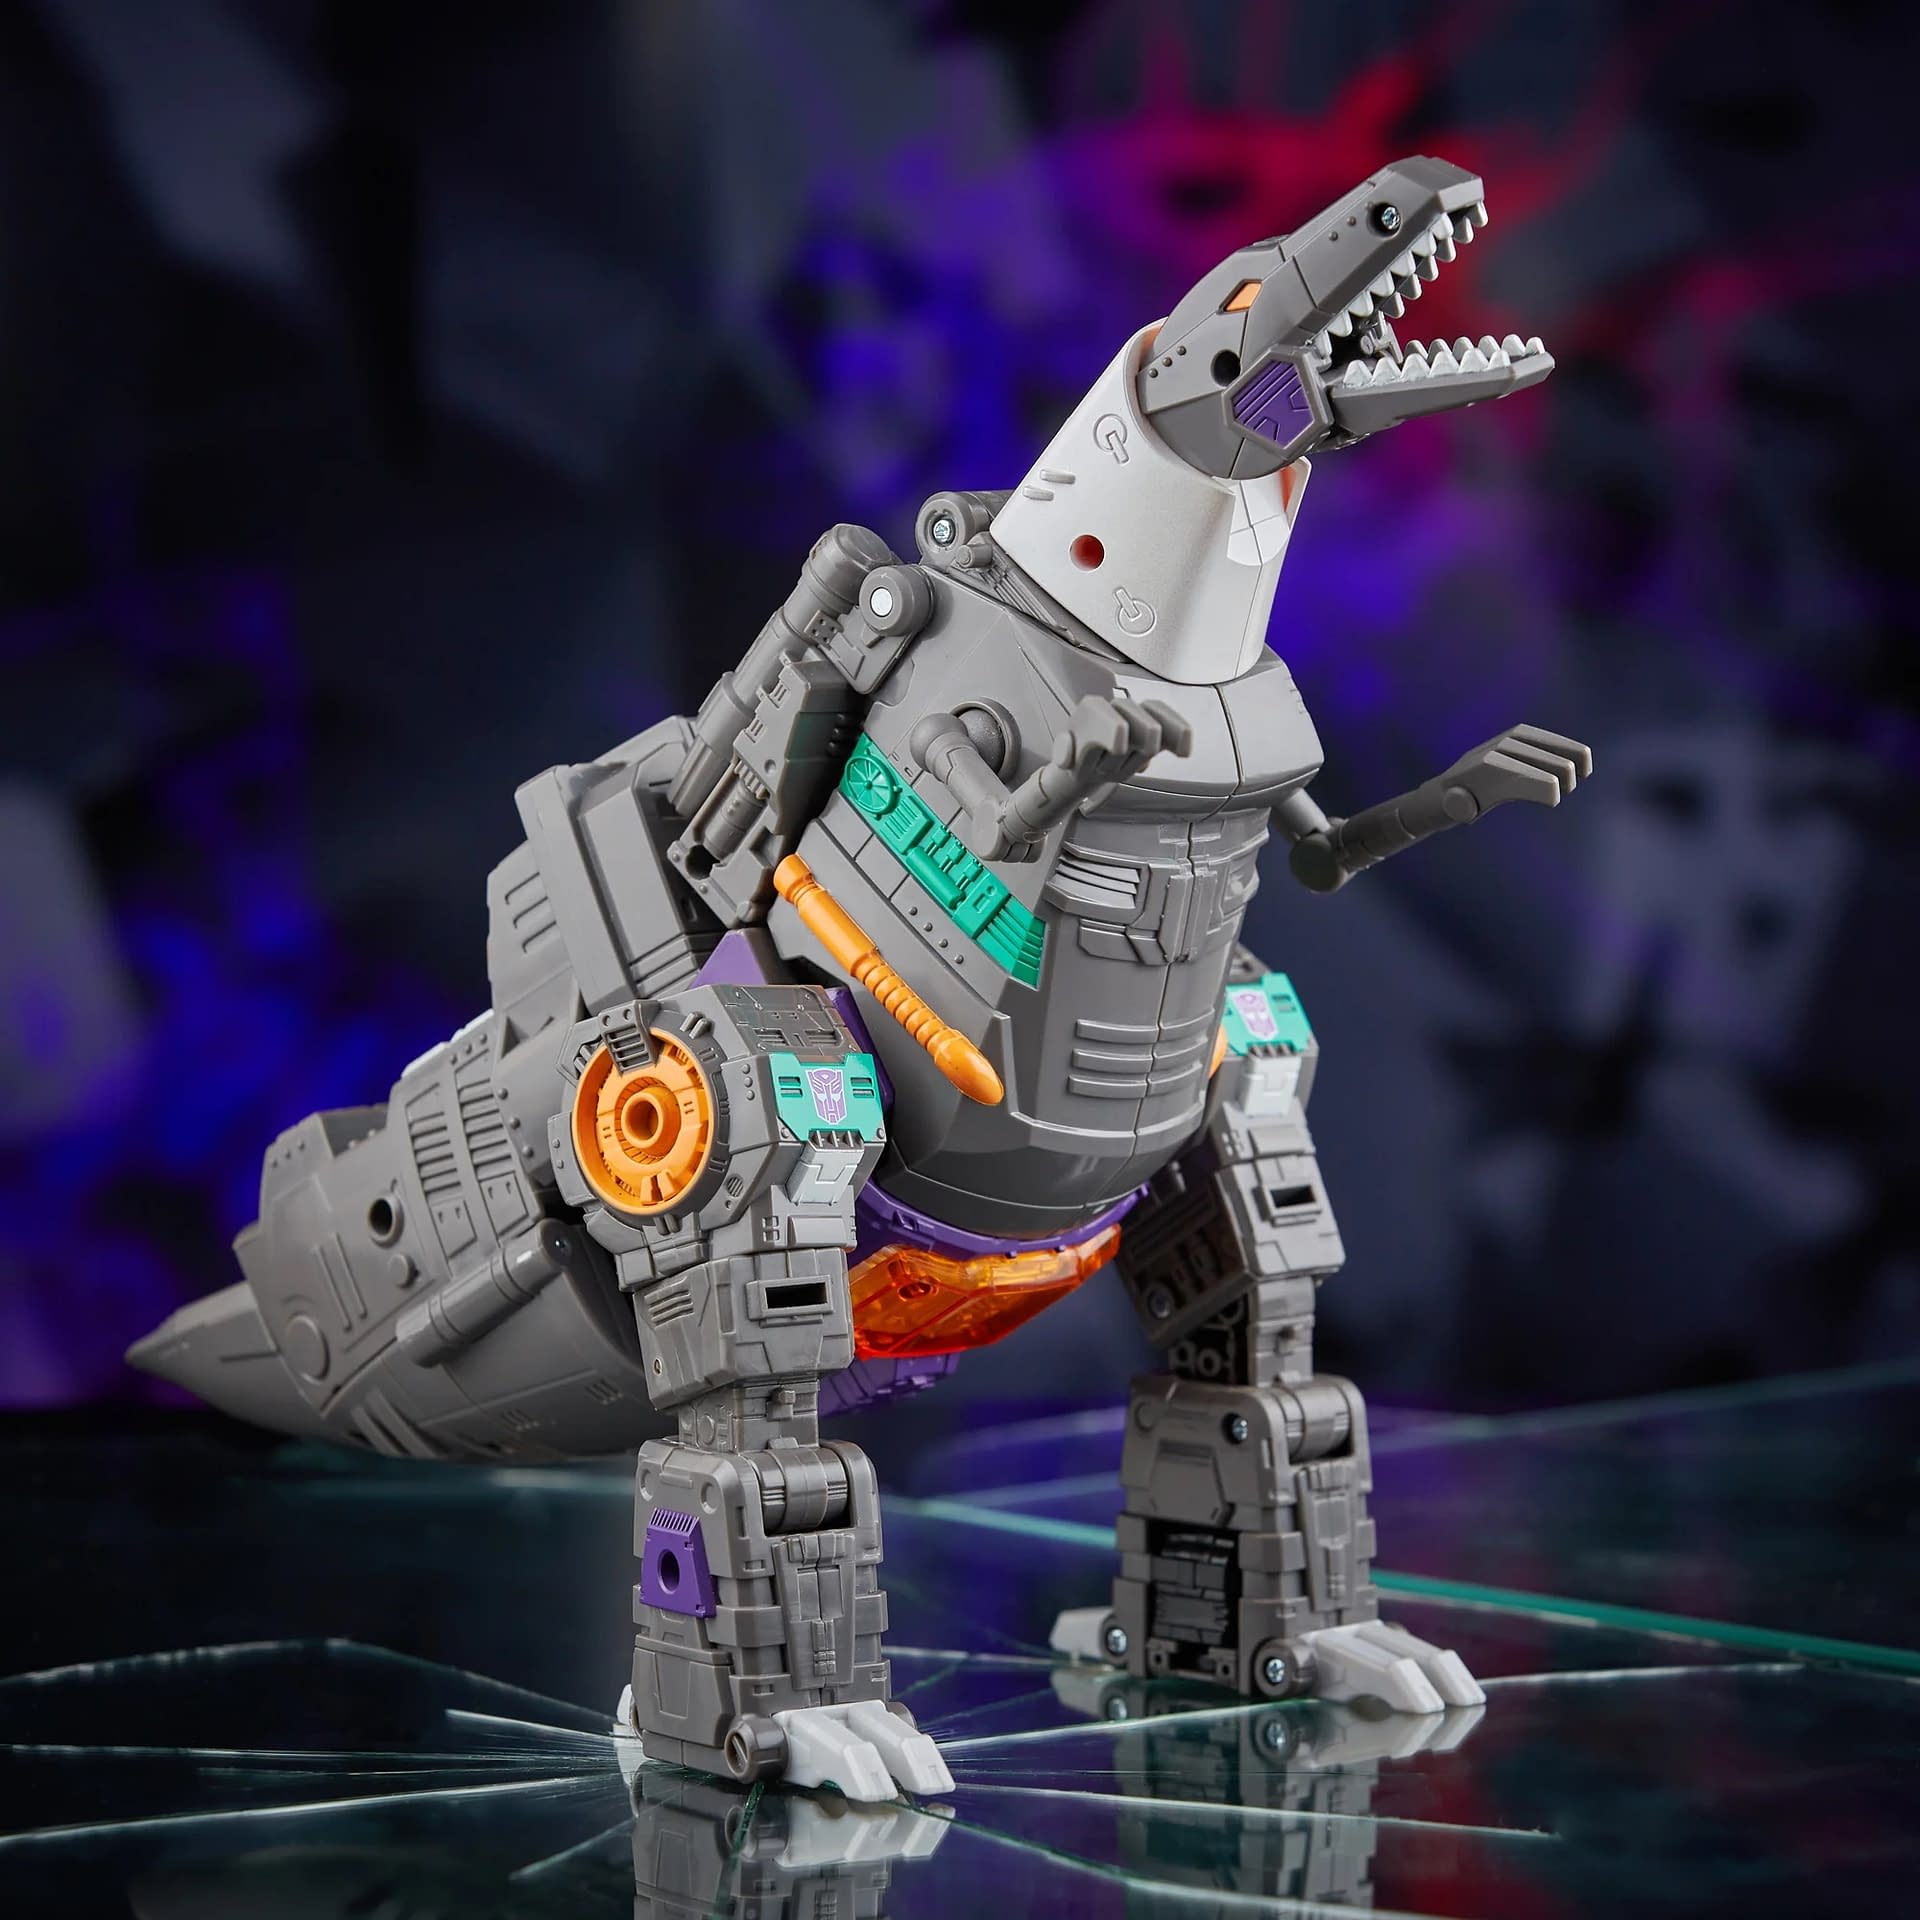  Transformers Shattered Glass Grimlock Enters the Fight from Hasbro